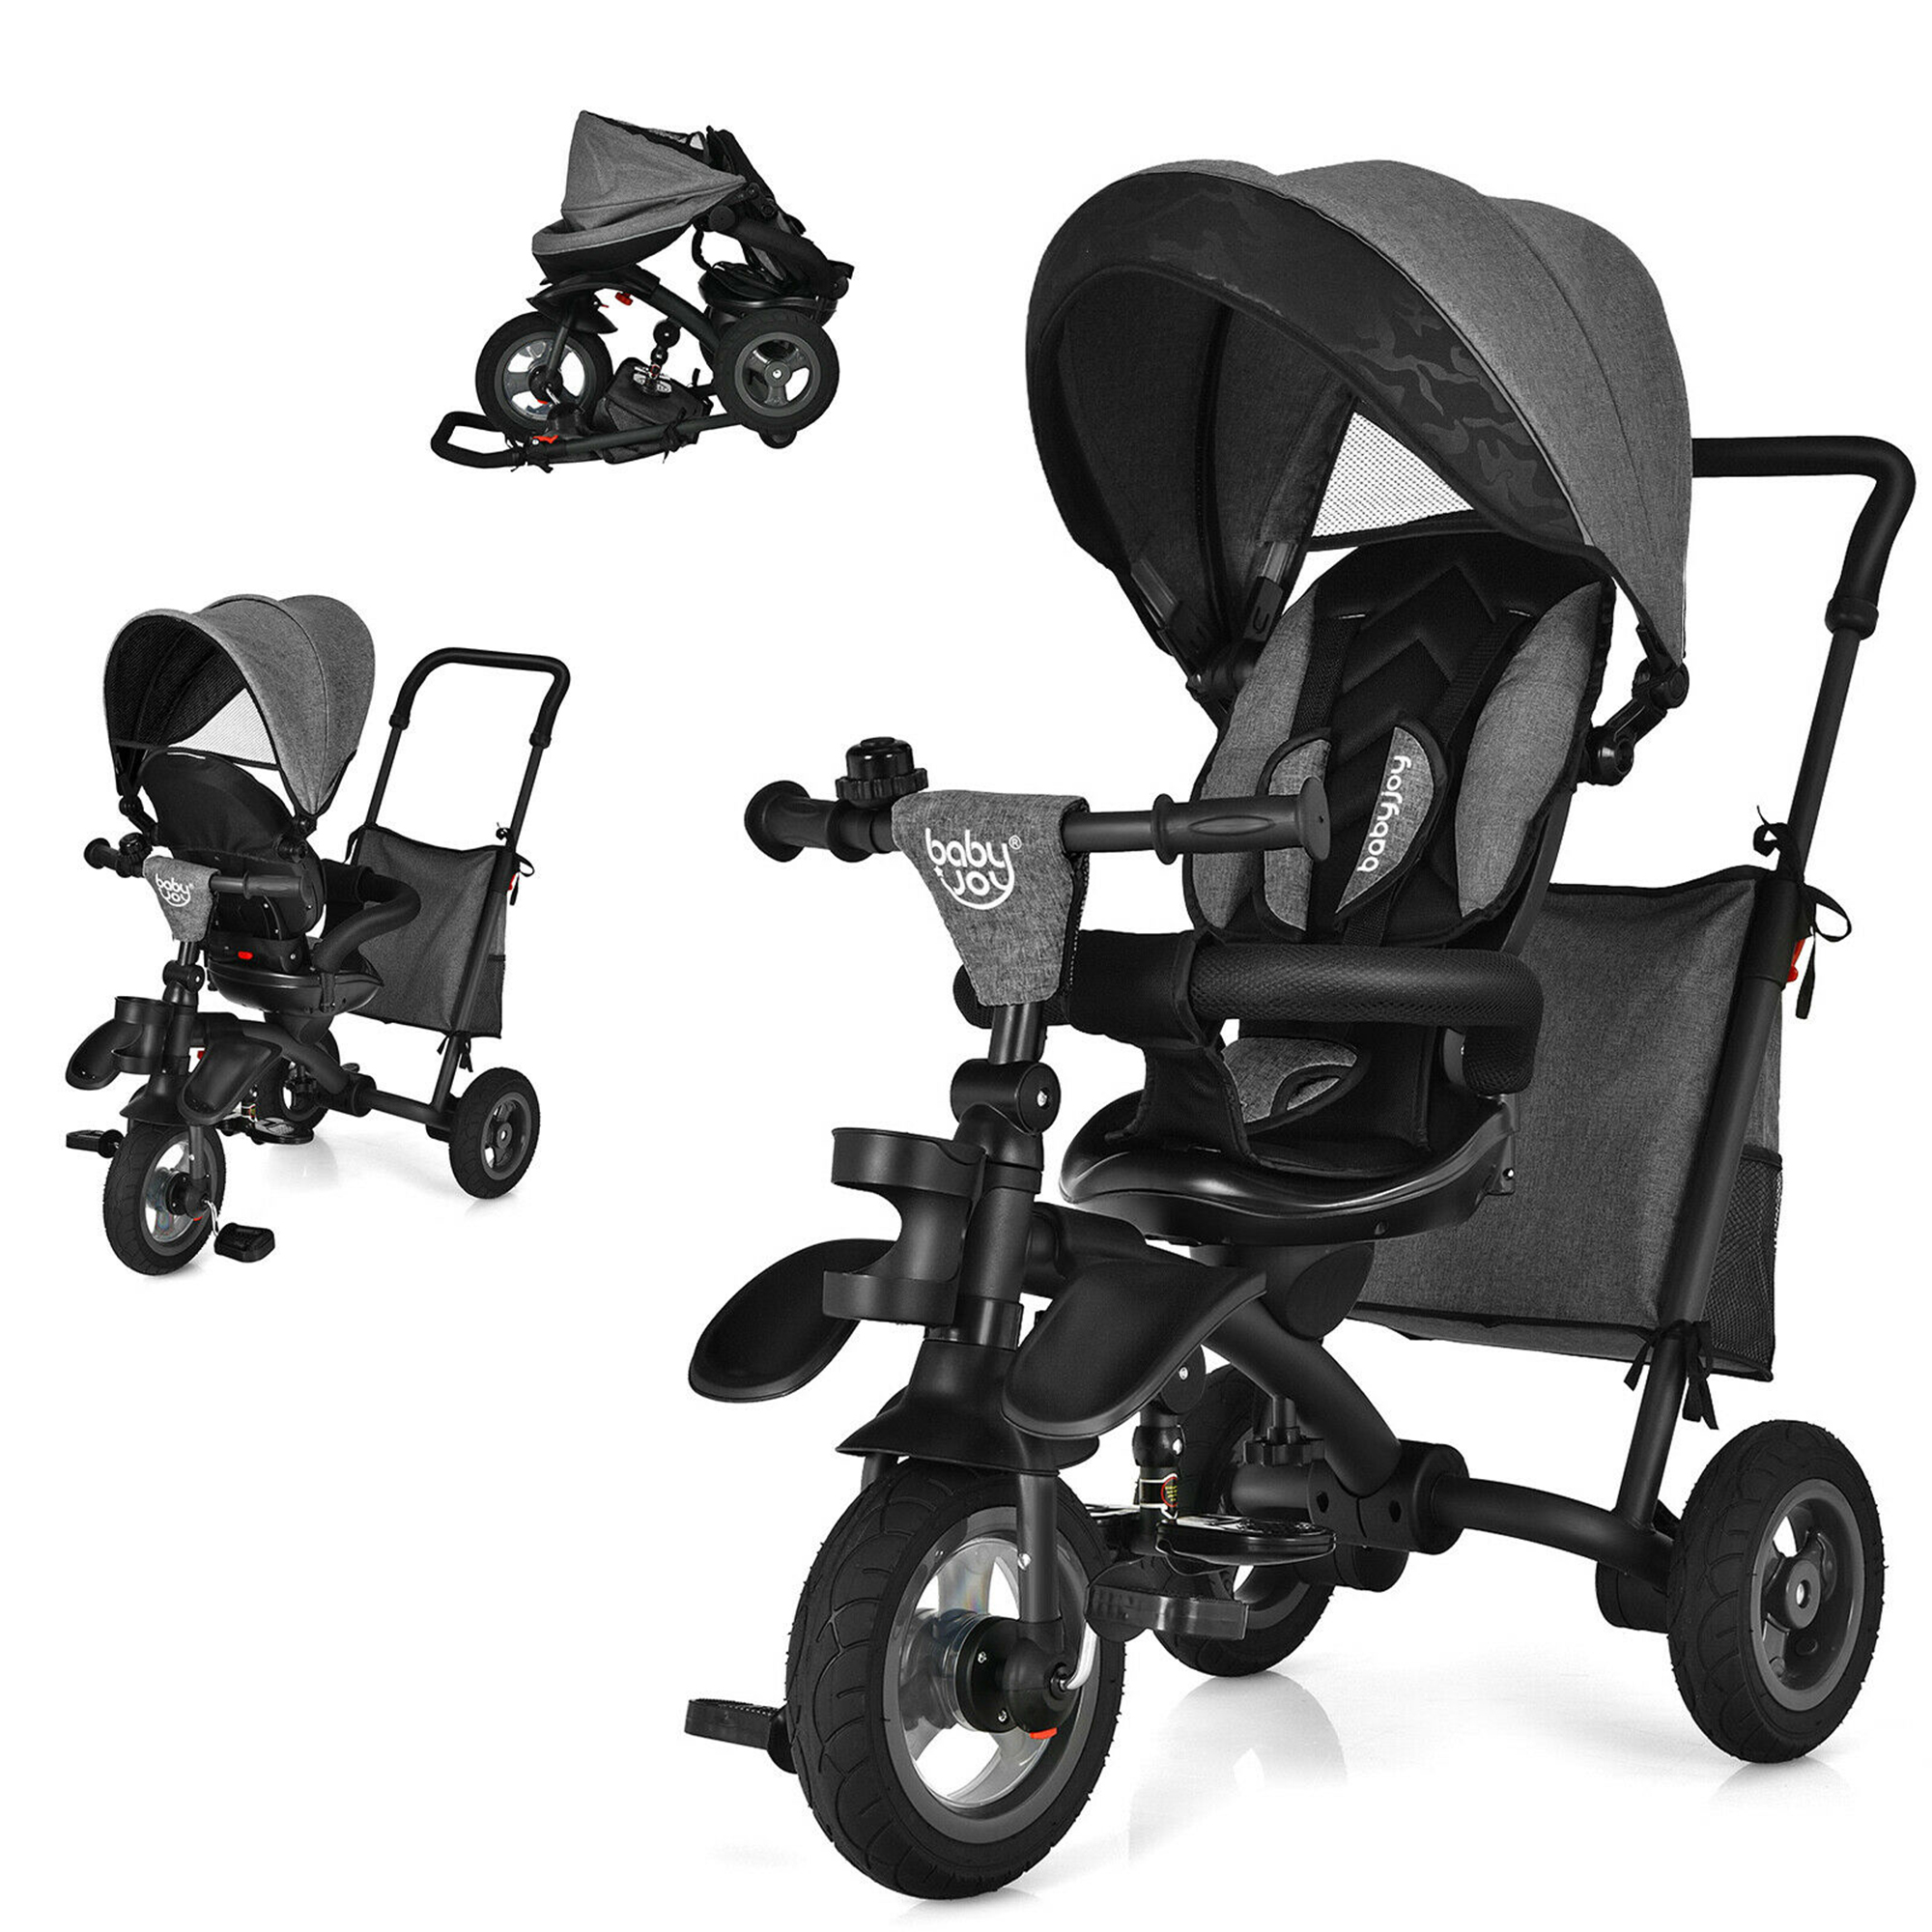 Gymax 7-In-1 Kids Baby Tricycle Folding Steer Stroller w/ Rotatable Seat  Grey - Walmart.com